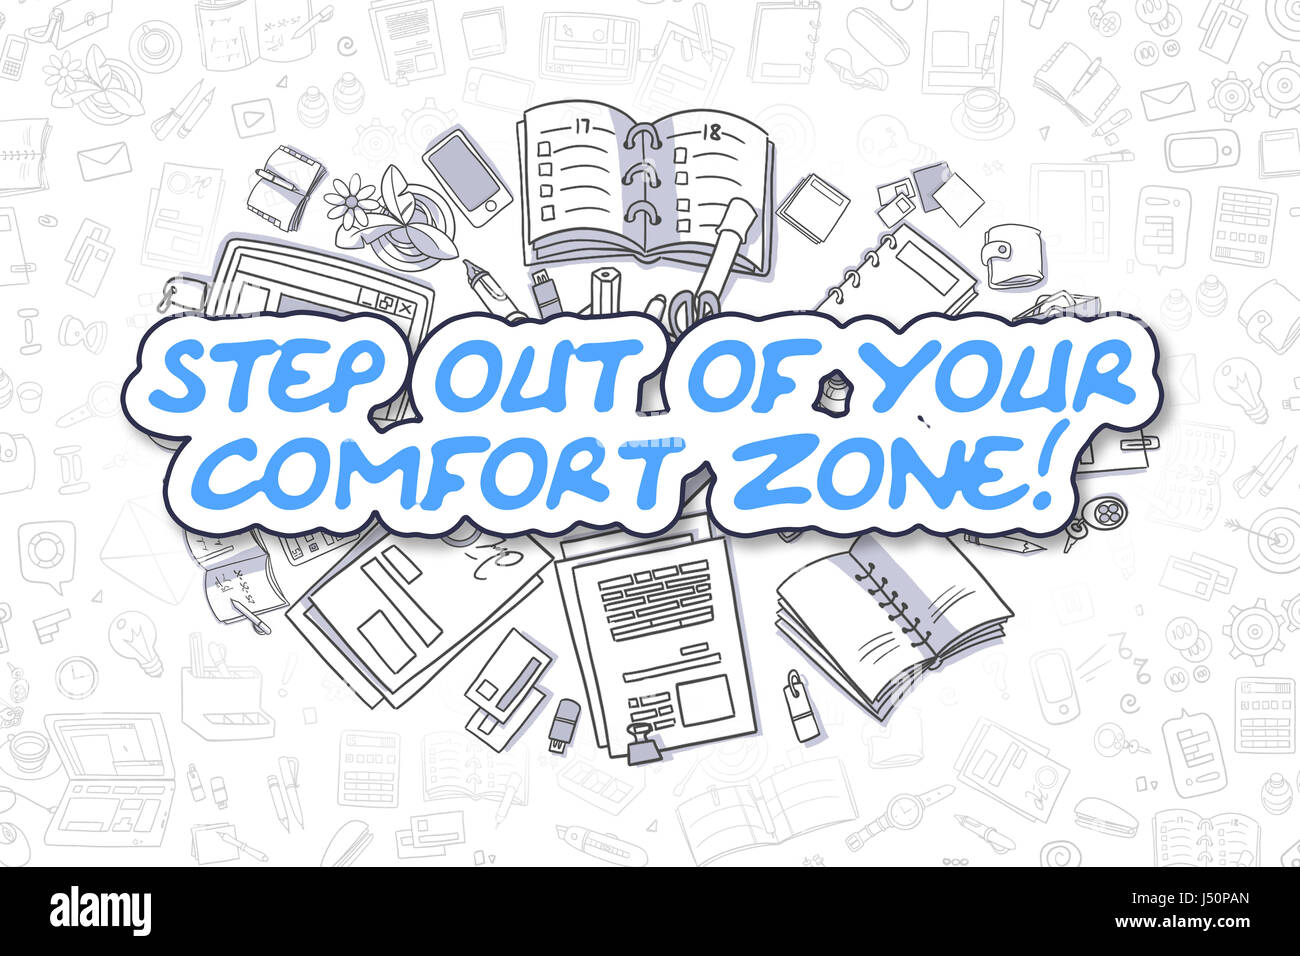 Step Out Of Your Comfort Zone - Business Concept. Stock Photo